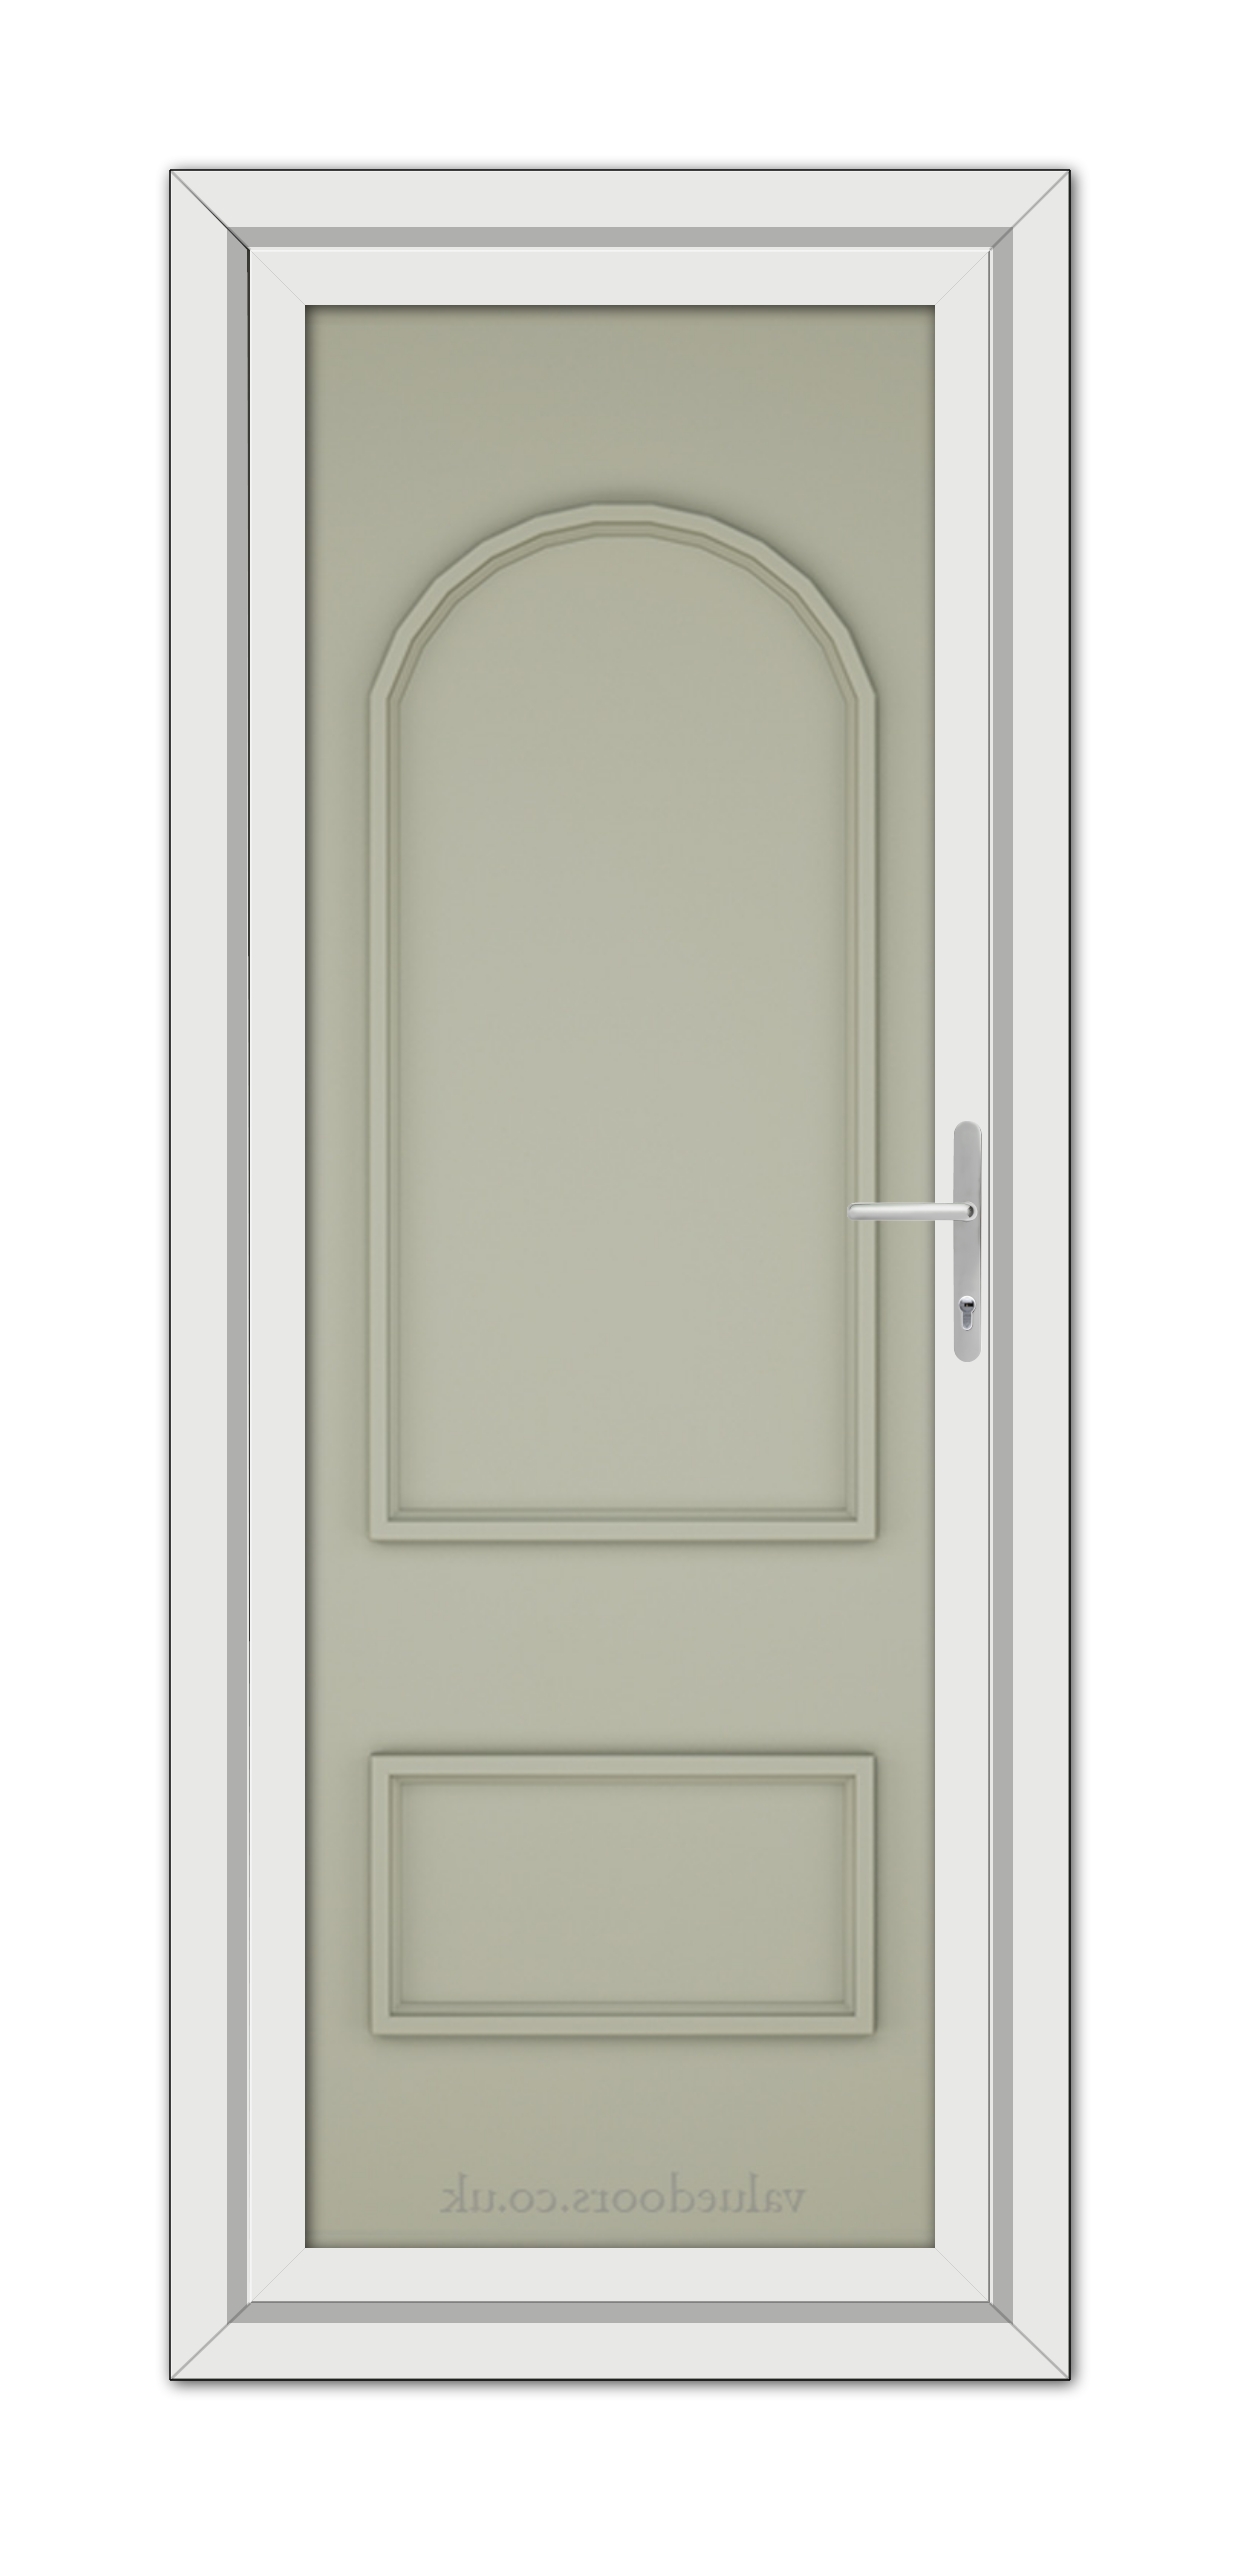 A vertical image of an Agate Grey Rockingham Solid uPVC door with a silver handle, set within a white door frame. The door features a simple, elegant panel design.